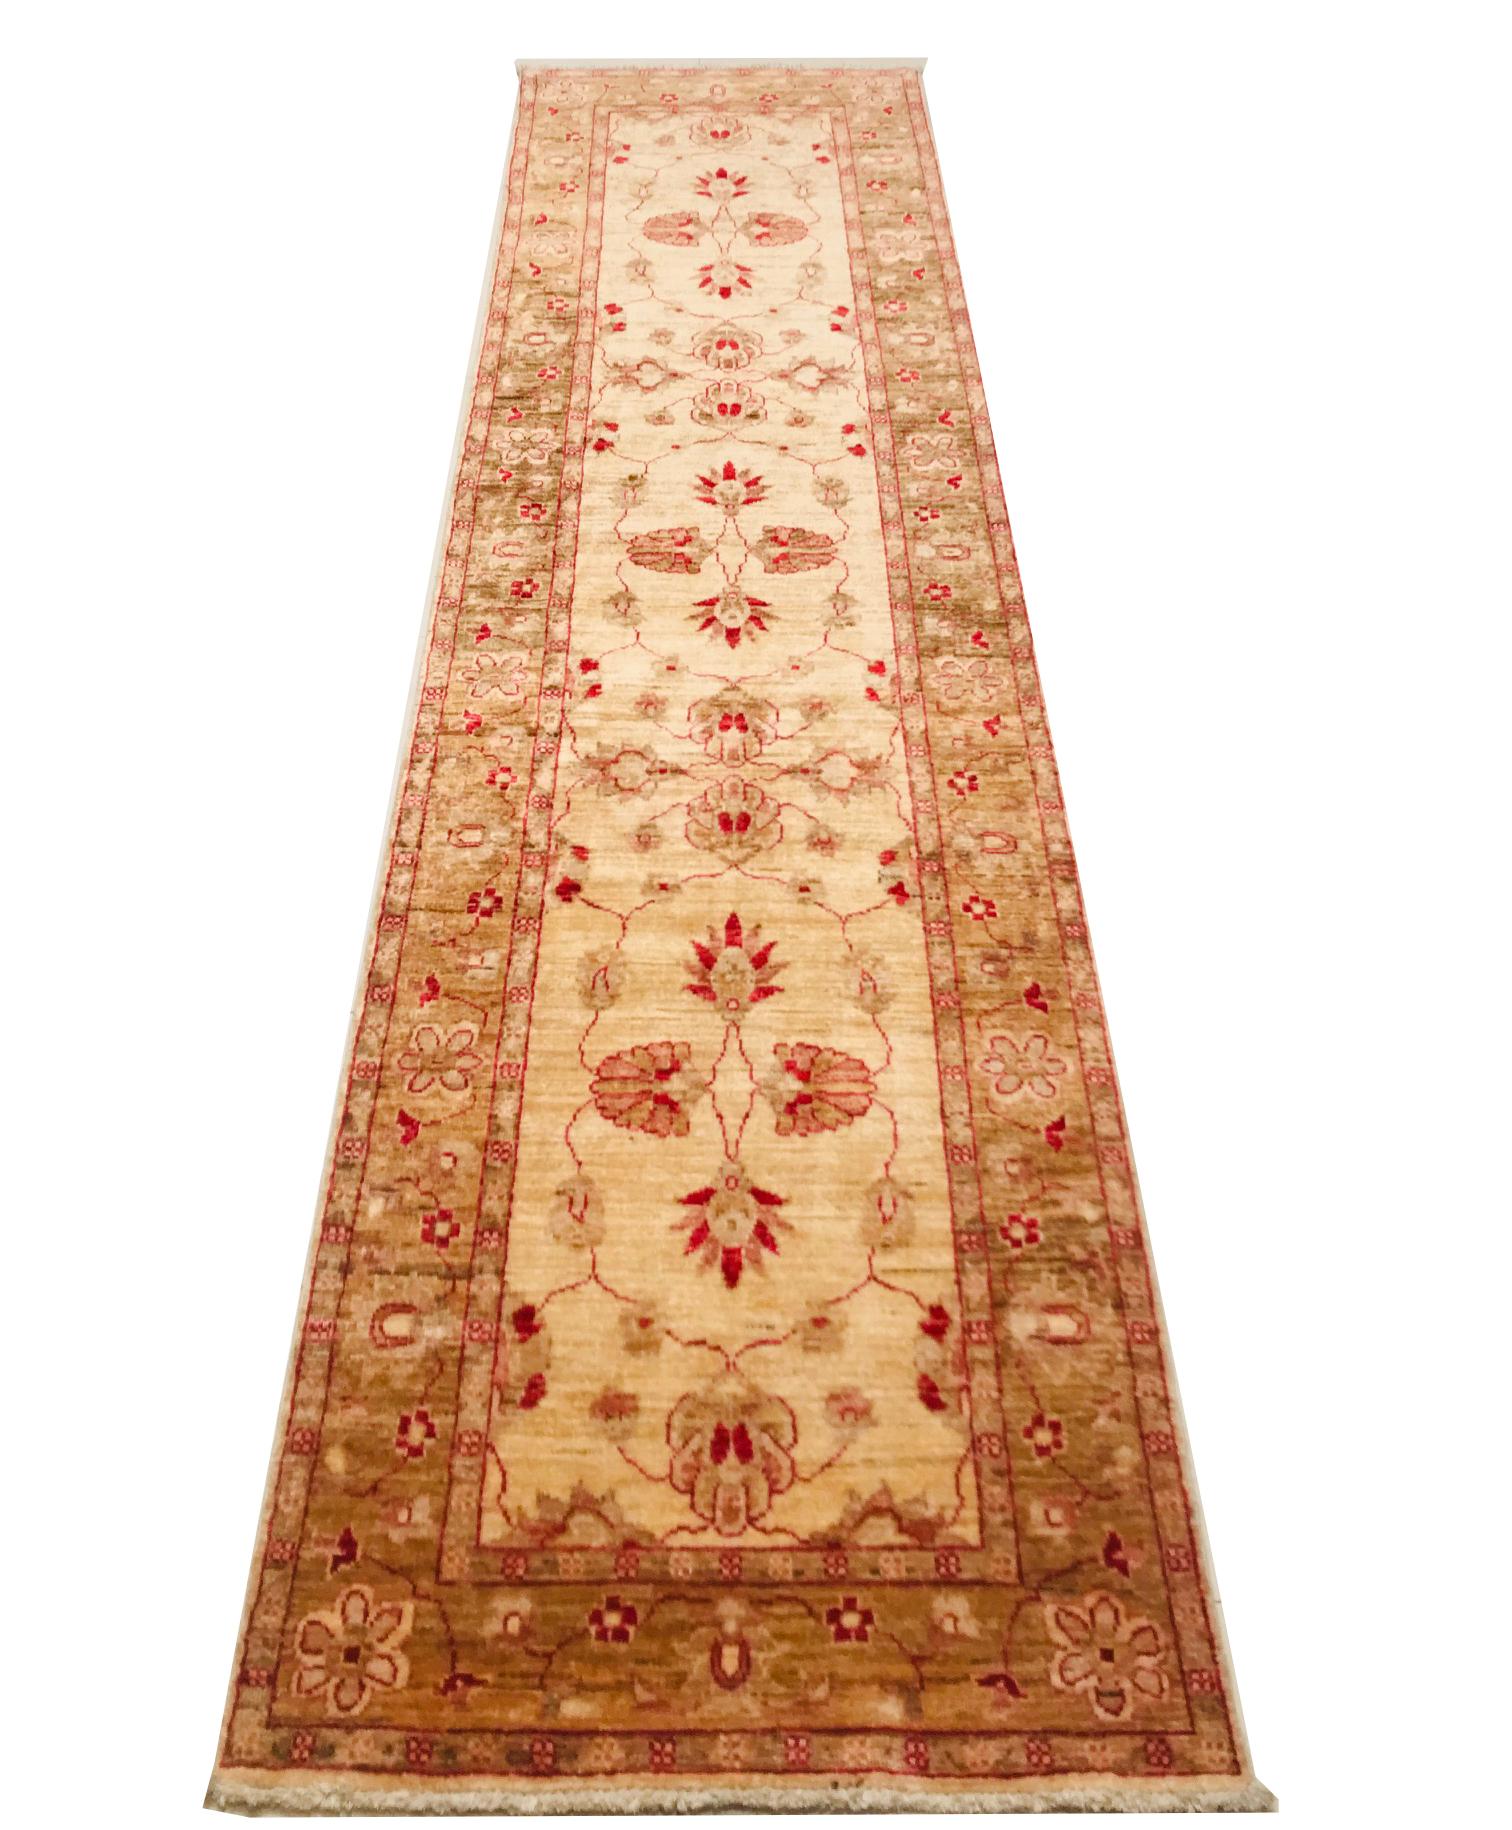 This Pakistan runner rug is from the 1970s, hand knotted with wool.
This carpet has drawings of flowers, a combination of soft colors such as red and beige that makes it a perfect piece to decorate a corner of our home.
All our carpets are part of